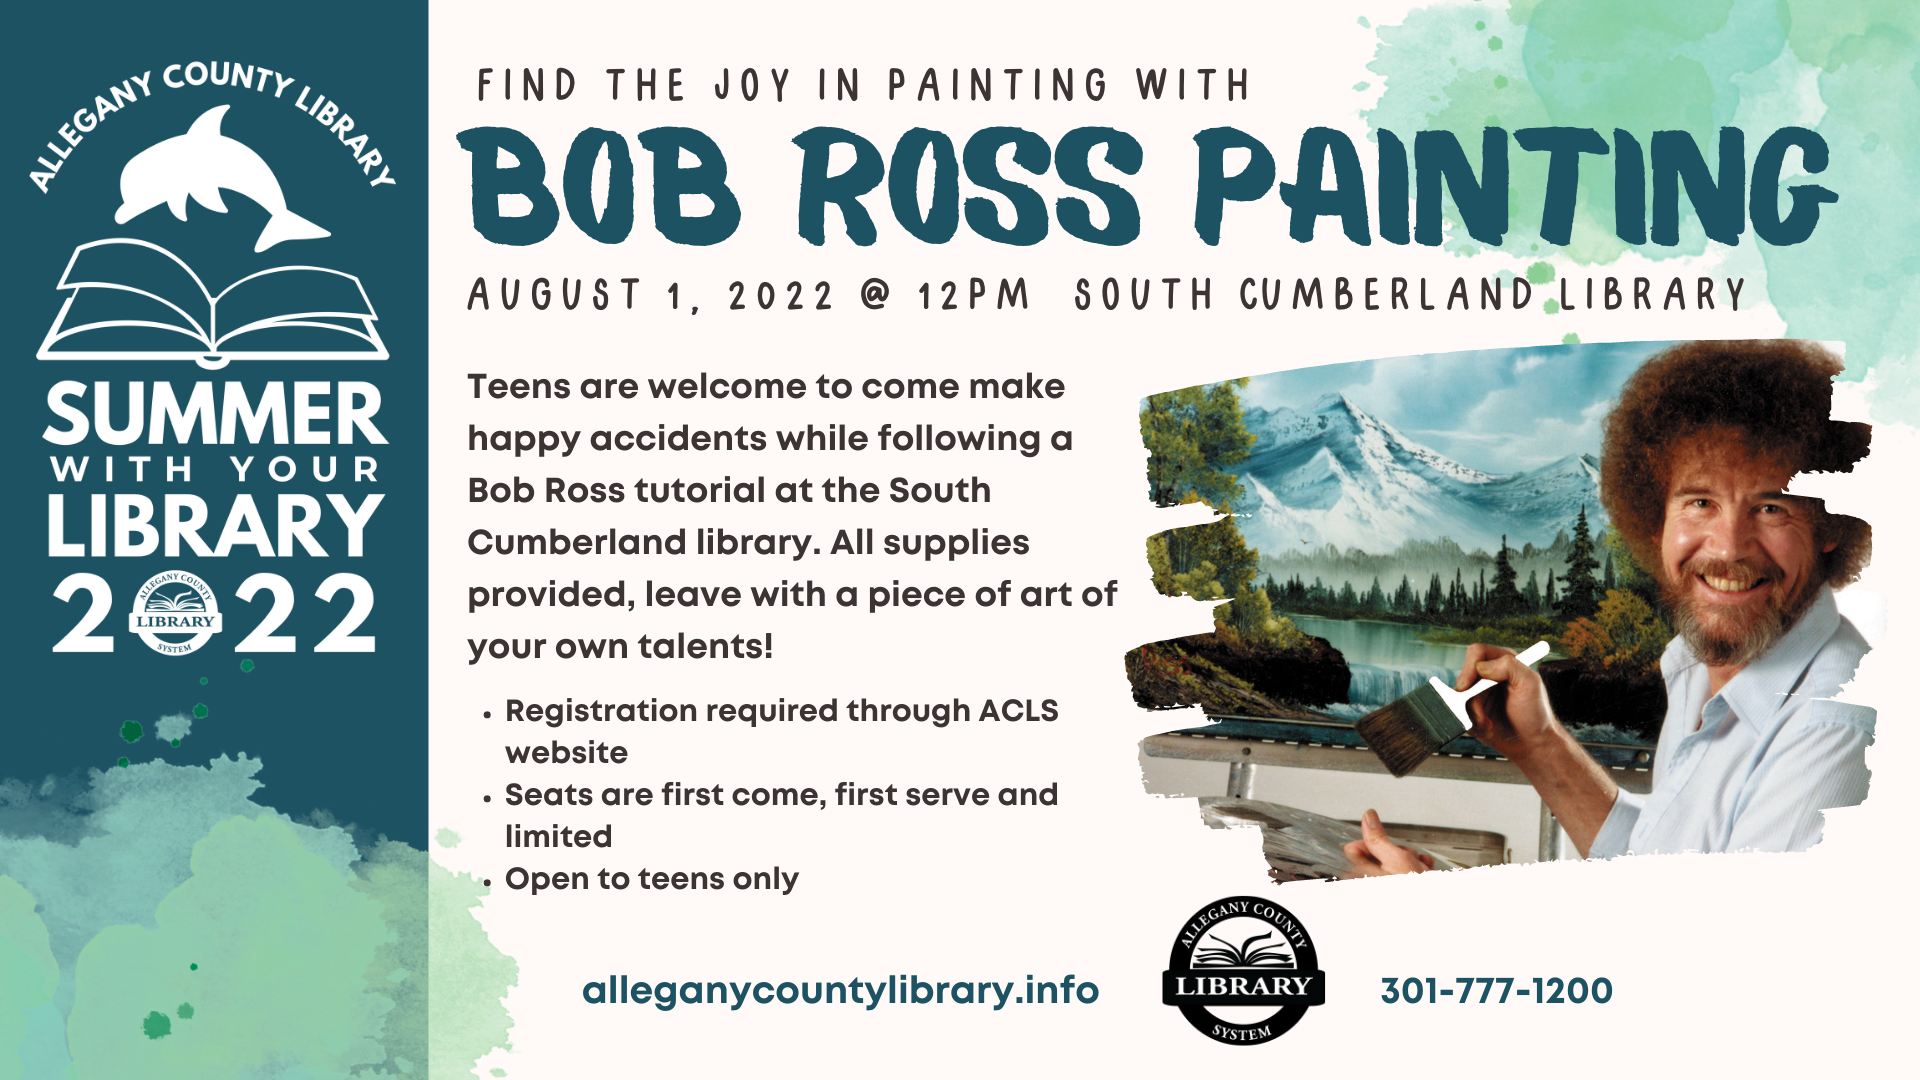 Bob Ross smiling at camera in front of a painted landscape. Event details to the right of him.